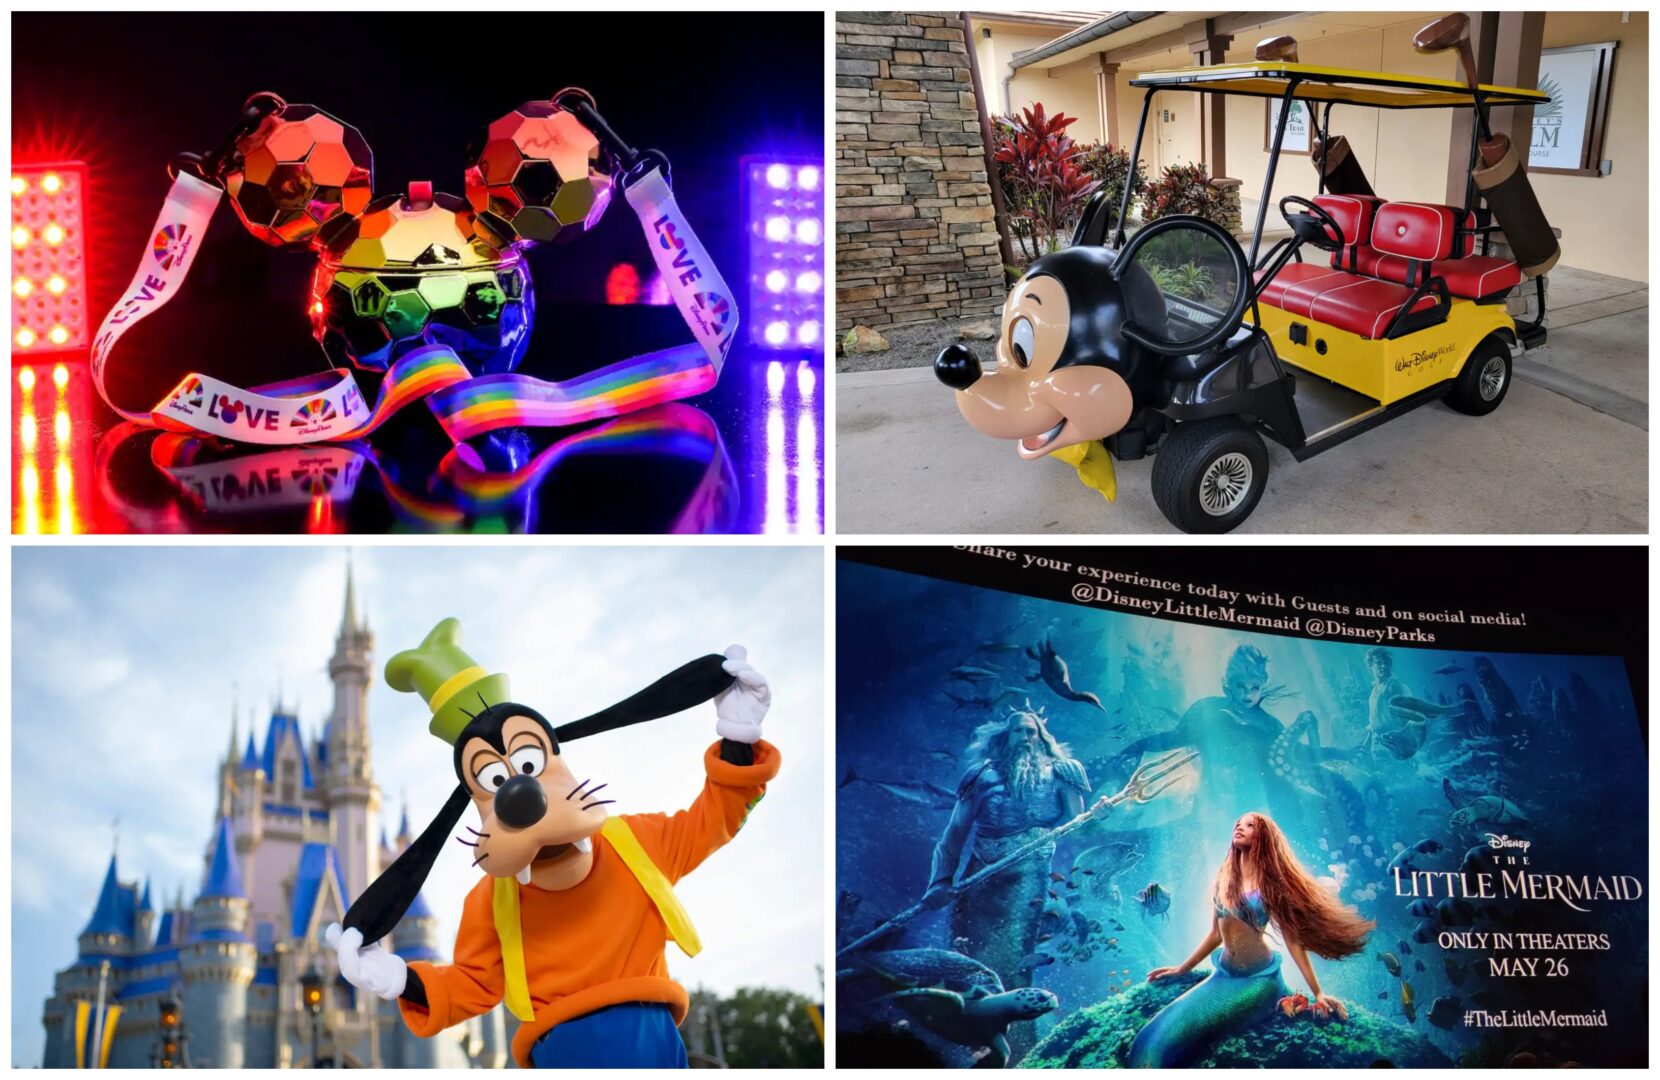 Disney News Highlights: We Say Gay with New Disney Parks Food and Popcorn Bucket and Sipper, FootGolf at Walt Disney World, The Little Mermaid Movie Review, Happy Birthday Goofy